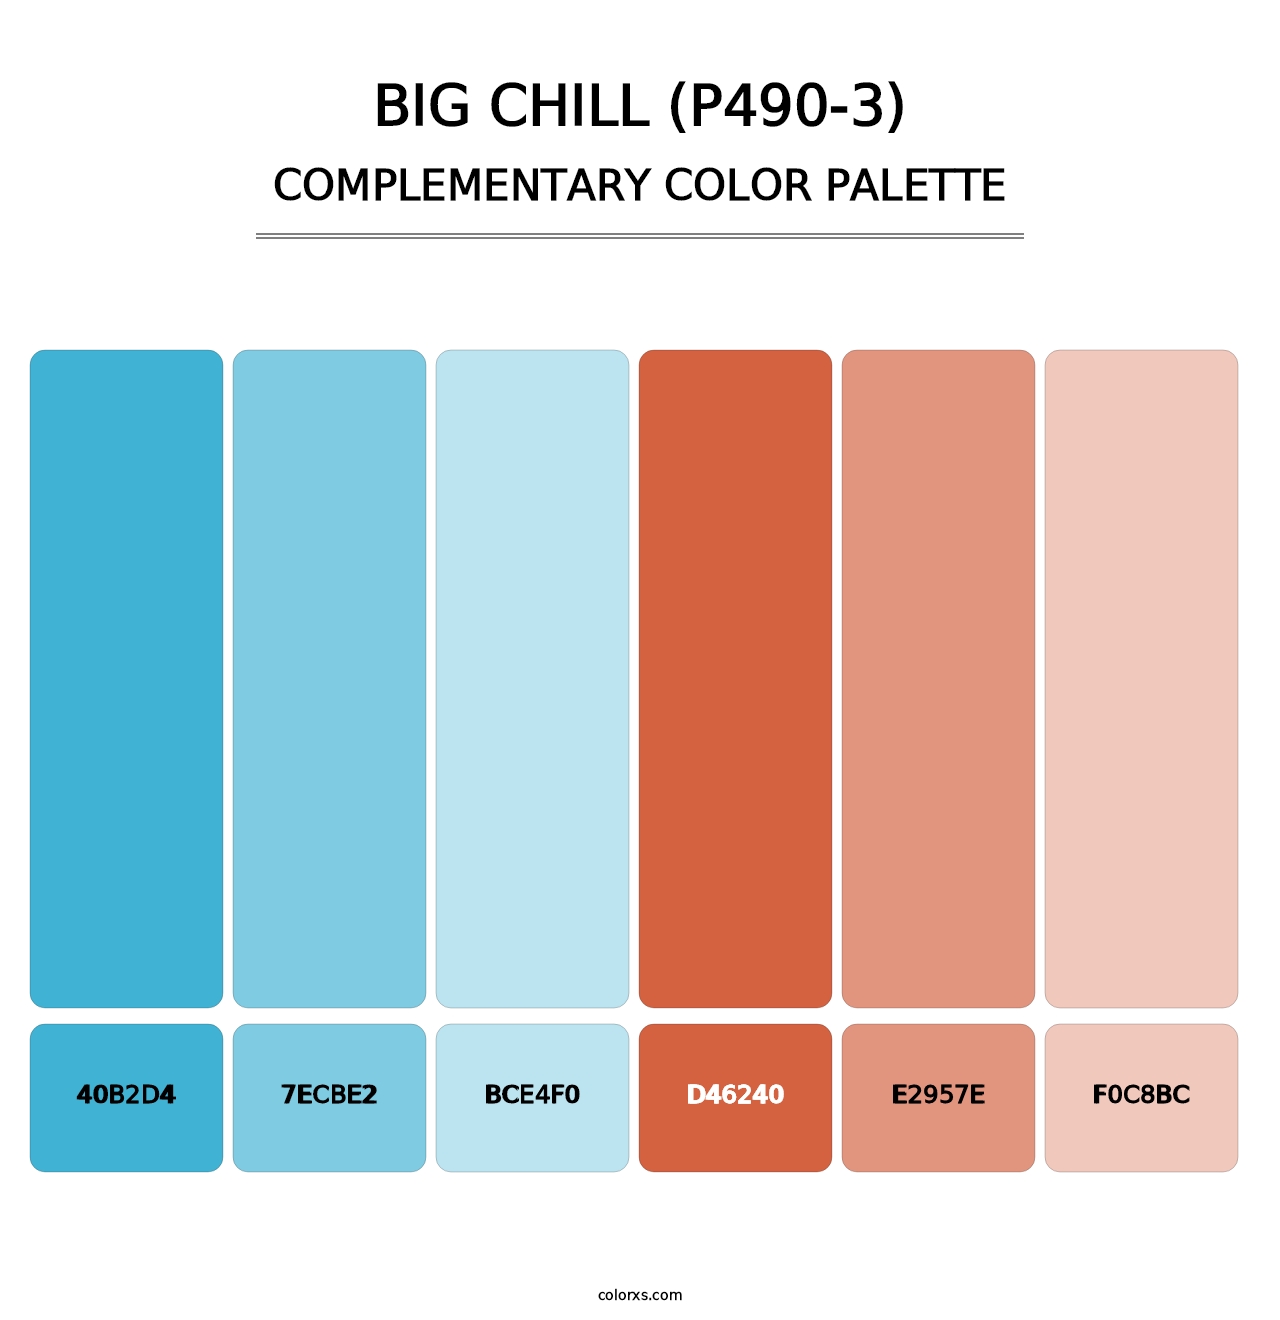 Big Chill (P490-3) - Complementary Color Palette